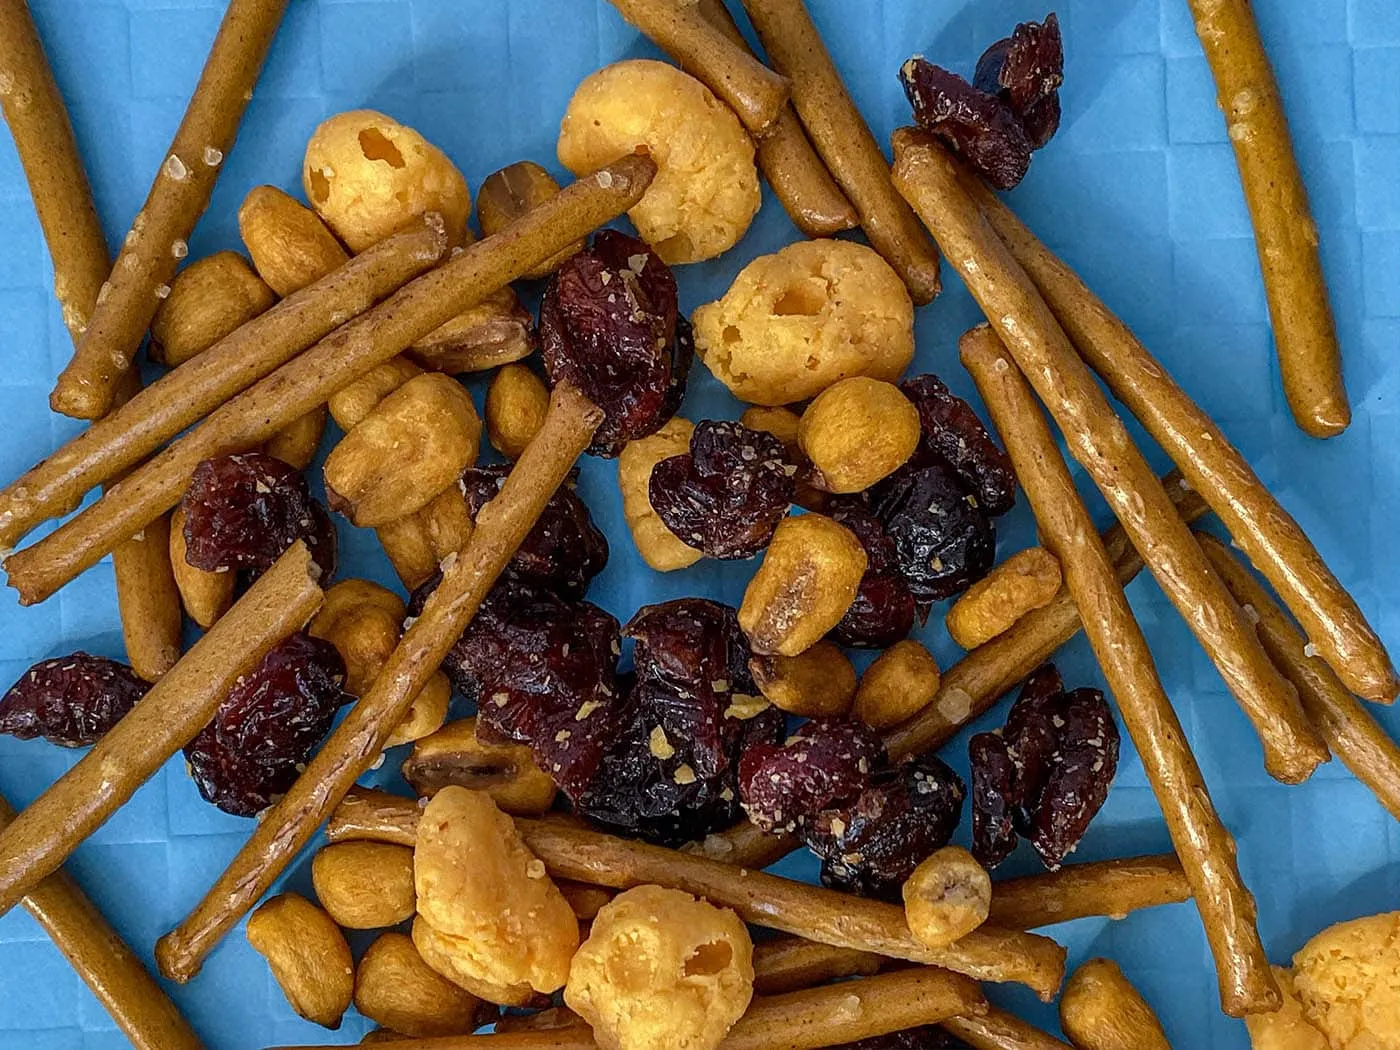 What are the best Wisconsin road trip snacks? We have them all plus the best Wisconsin recipe that snack mix combines all the flavors of the state. From cheese curds to pretzels to cranberries, this is what you should snack on in Wisconsin.